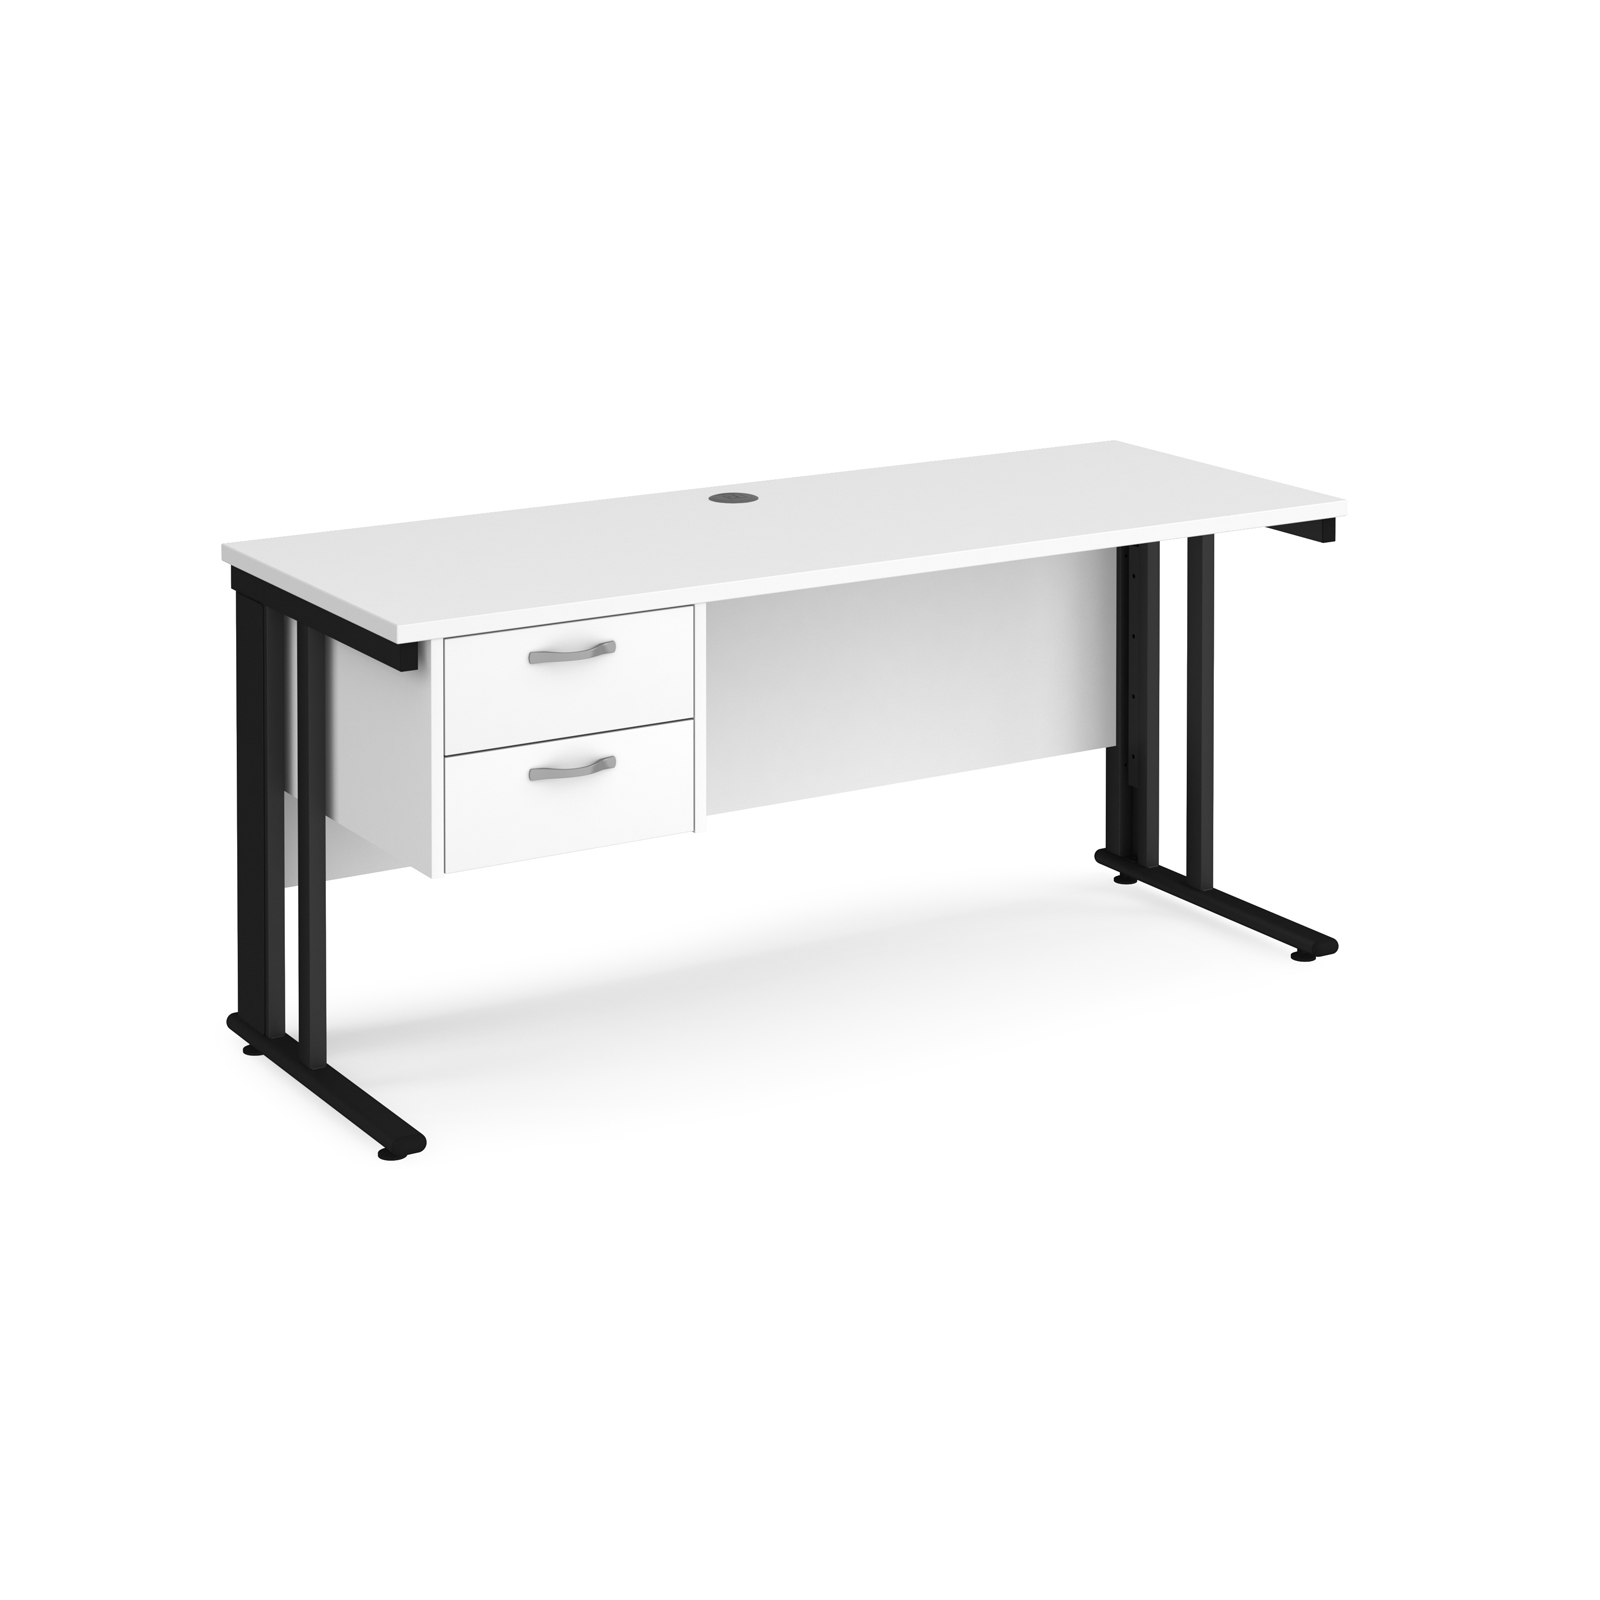 Maestro 25 straight desk 1600mm x 600mm with 2 drawer pedestal - black cable managed leg frame, white top